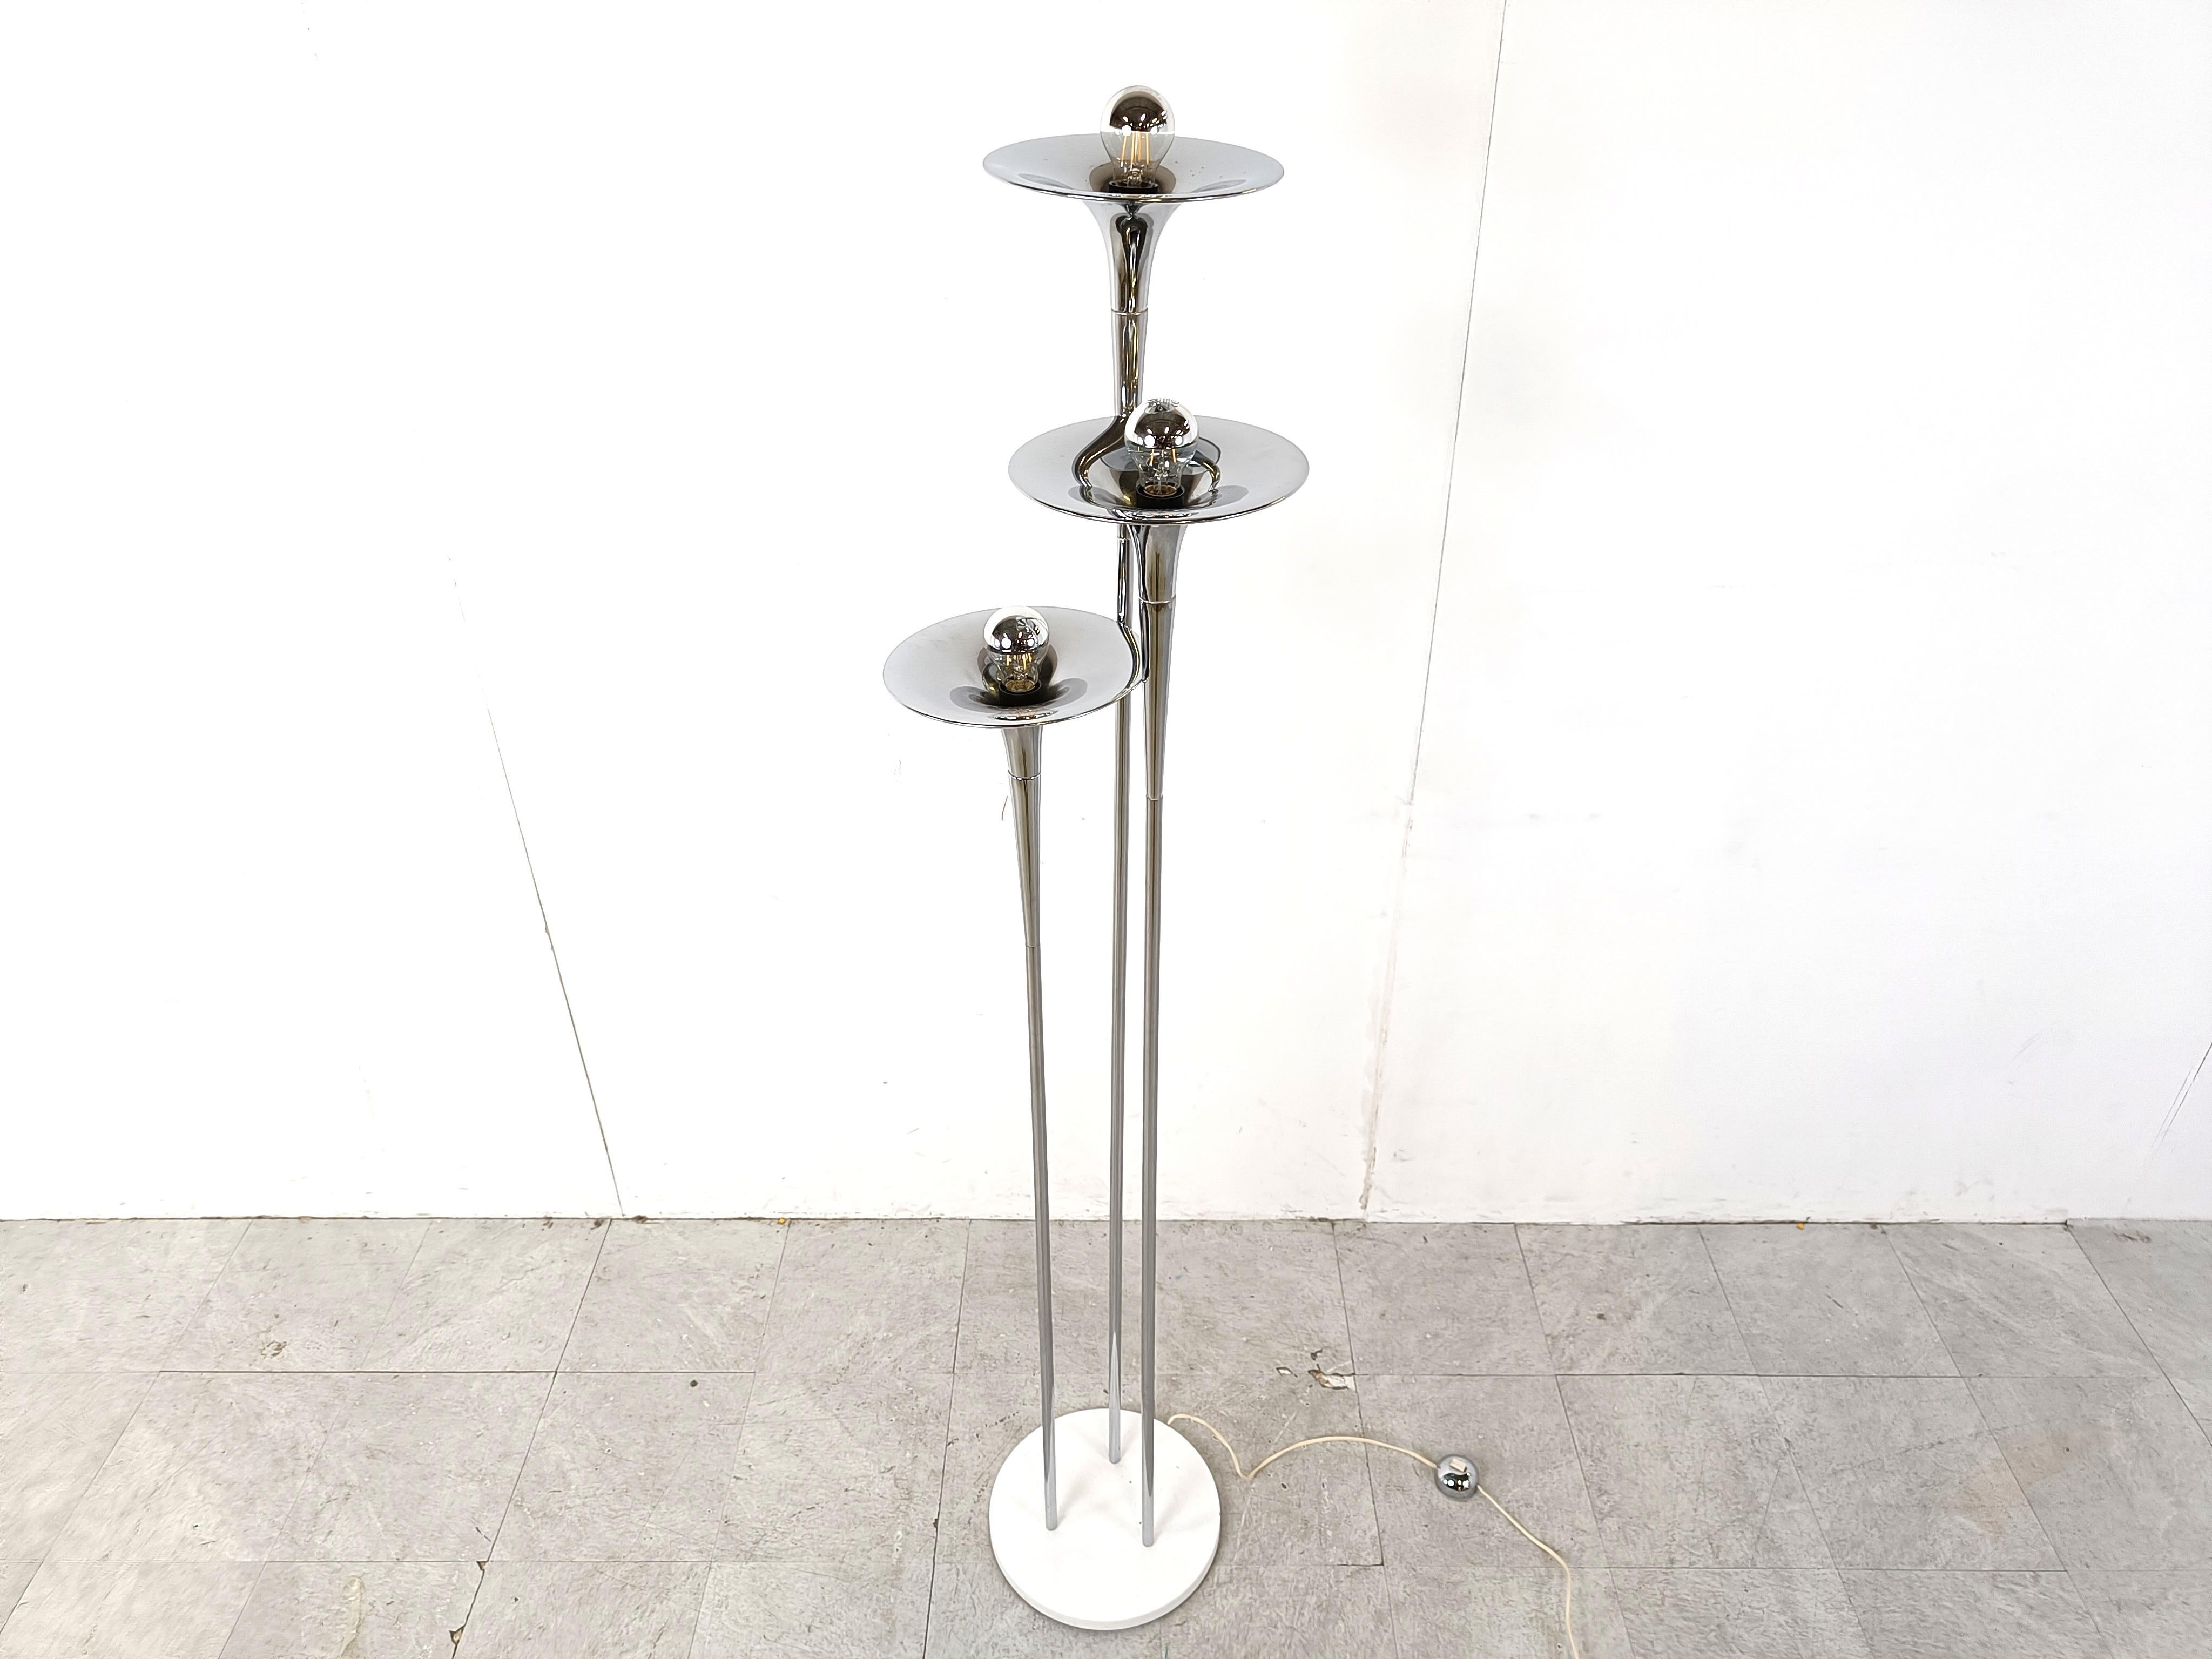 Tall Tony Paul, Bellini Collection, Chrome Uplight Torchiere Floor Lamp for Mutual-Sunset Lamp Co. 1970's. 

Featuring a three elongated horn forms in chrome-plated steel on a round white enameled metal base, with three lights. Reflective.